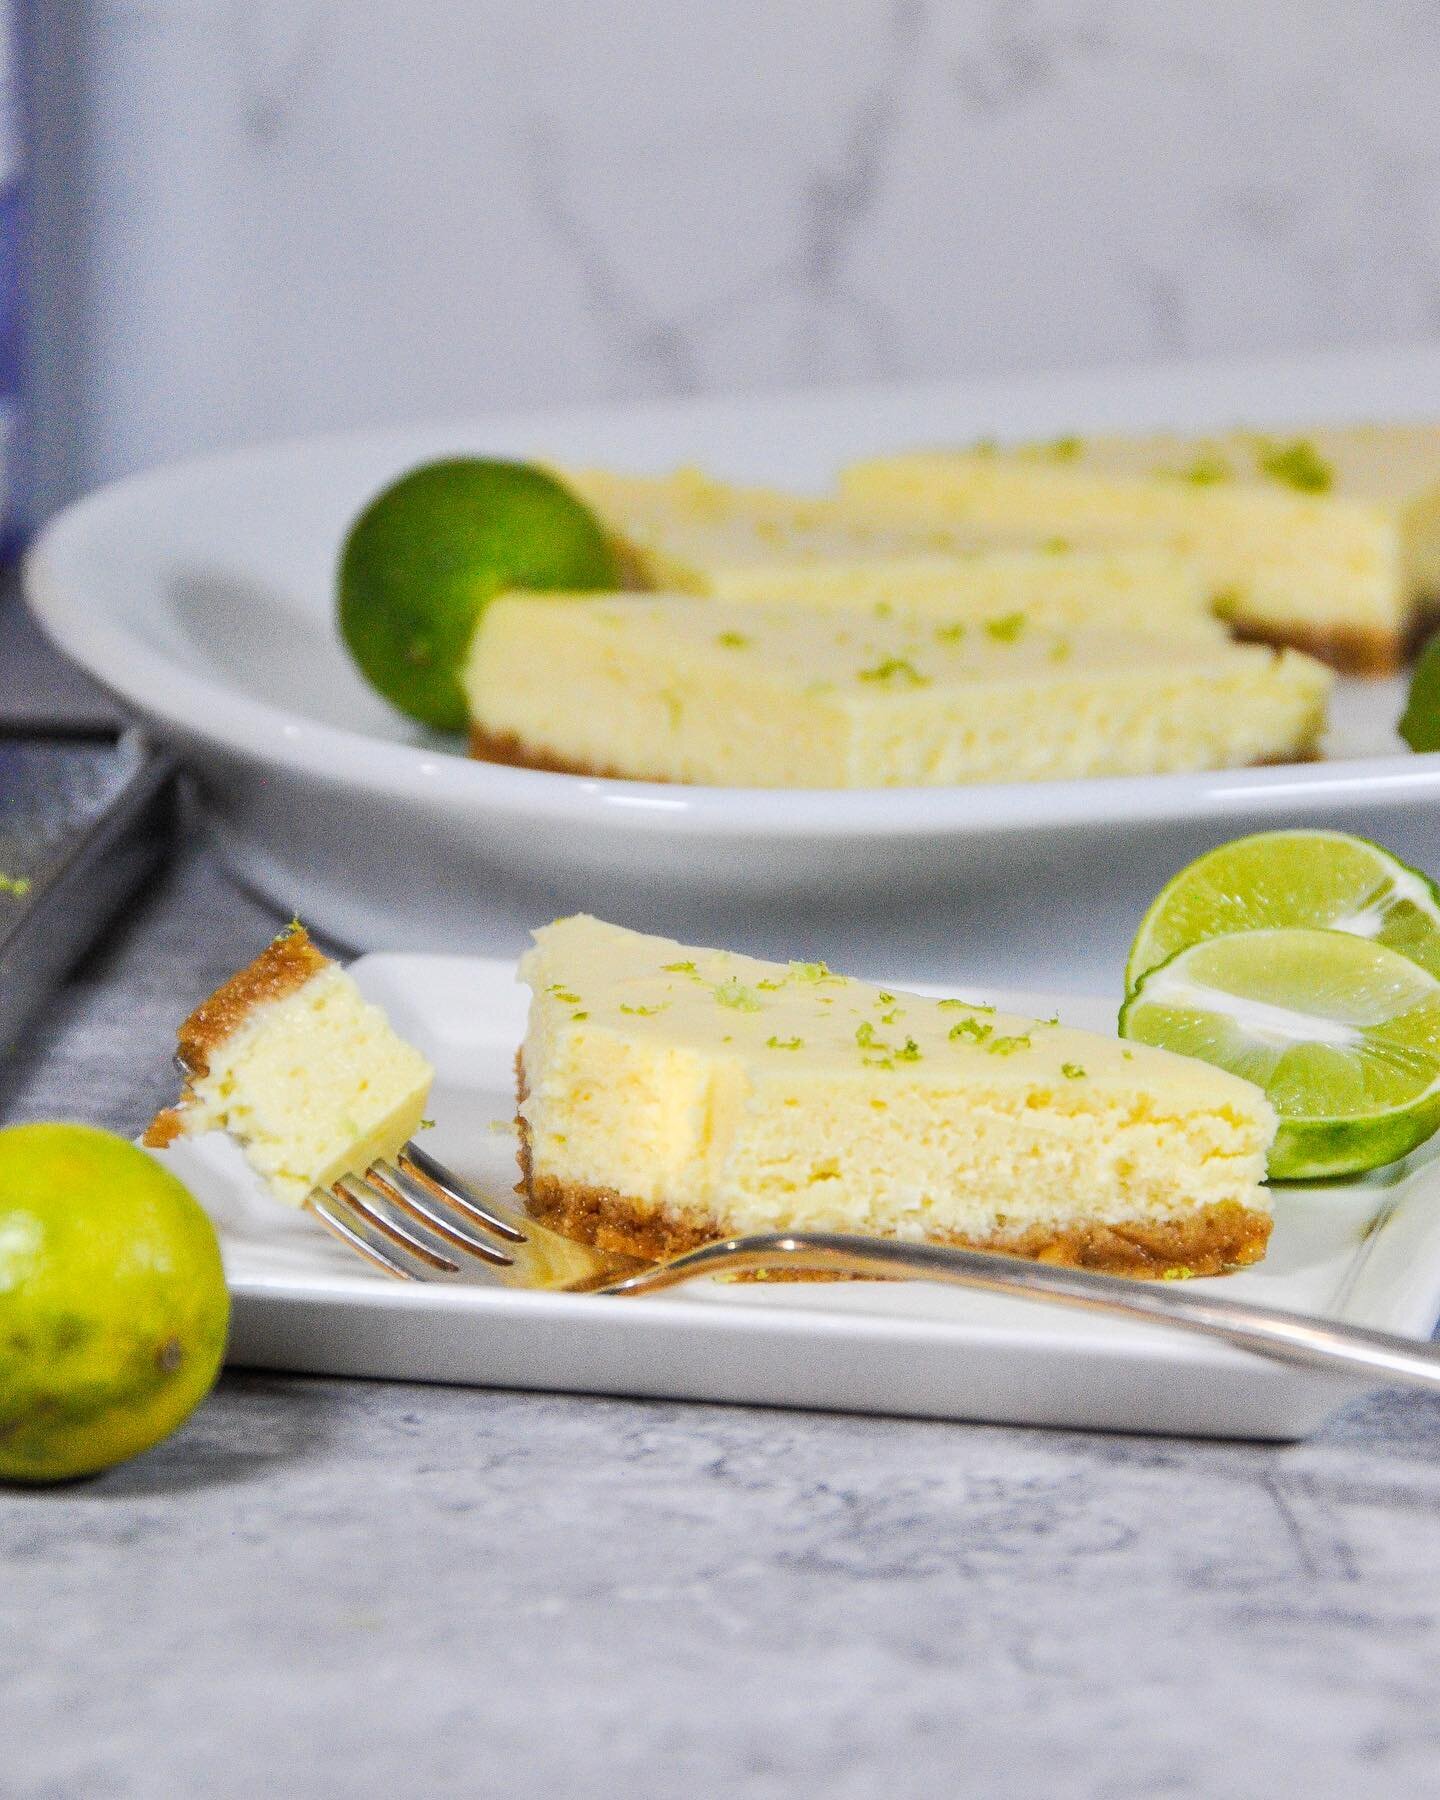 Key Lime Cheesecake Bites 💚

I know it&rsquo;s fall, but it basically stays hot in LA through October so I wanted to make a cool and refreshing dessert! I love making cheesecake bites and felt inspired to work with key limes. These are silky and pac